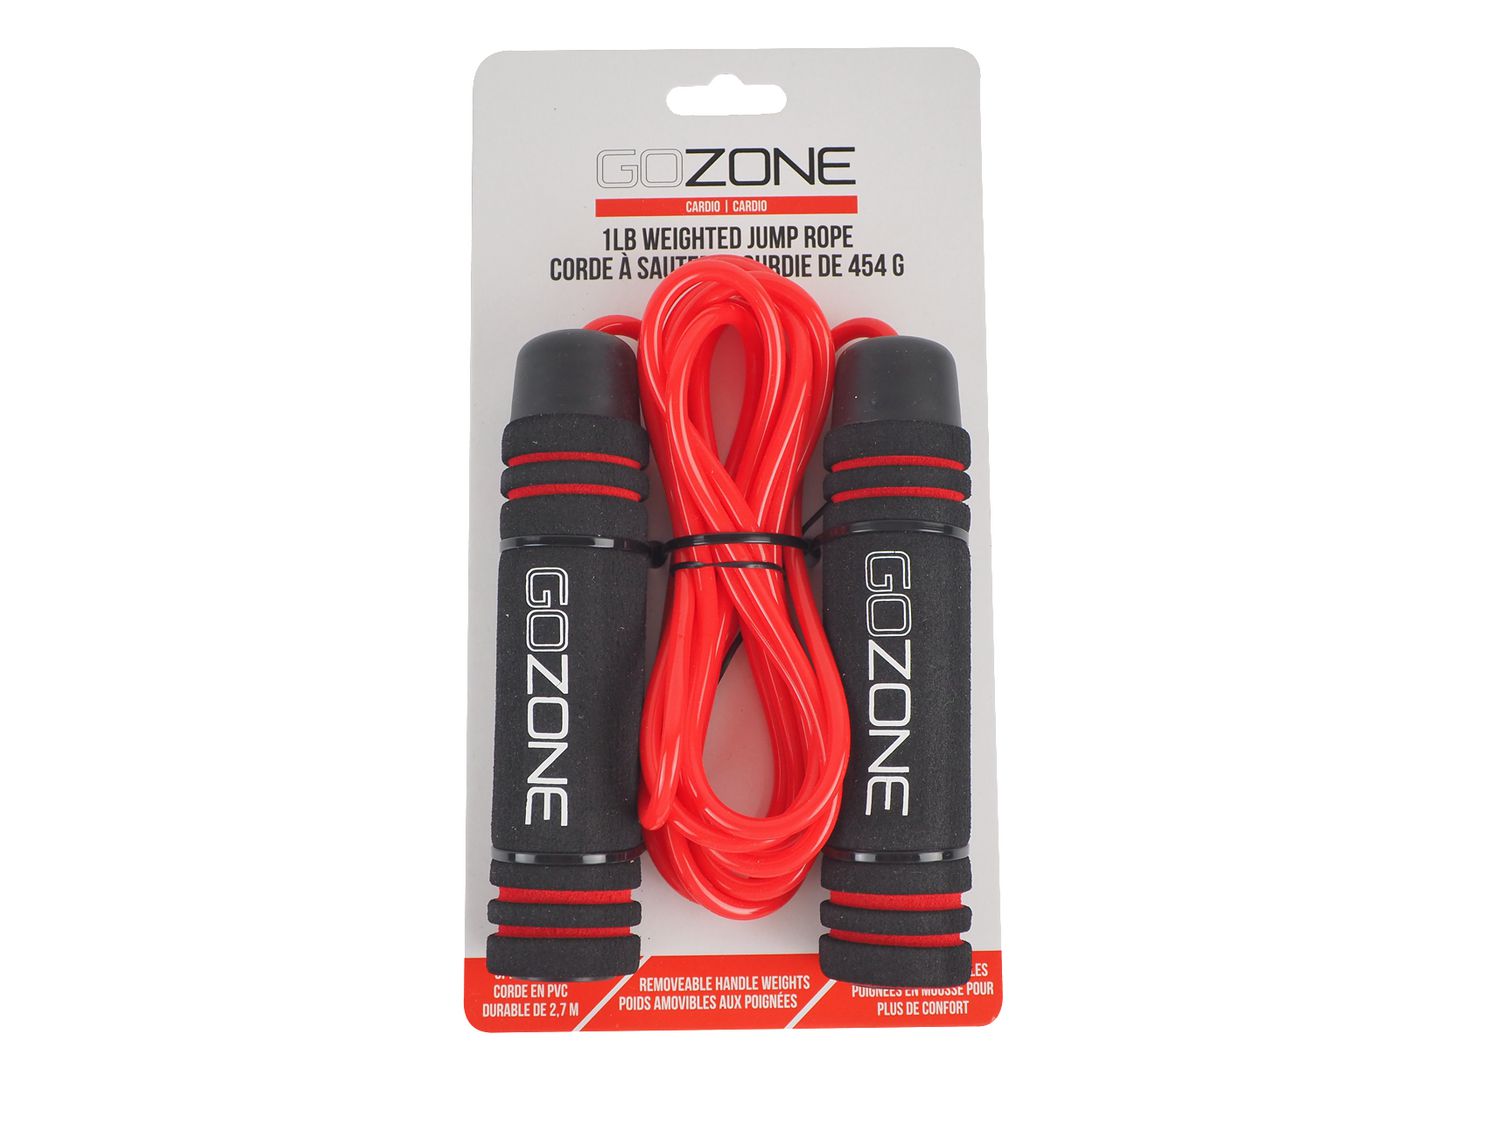 GoZone 1lb Weighted Jump Rope – Red/Black, Adjustable length 